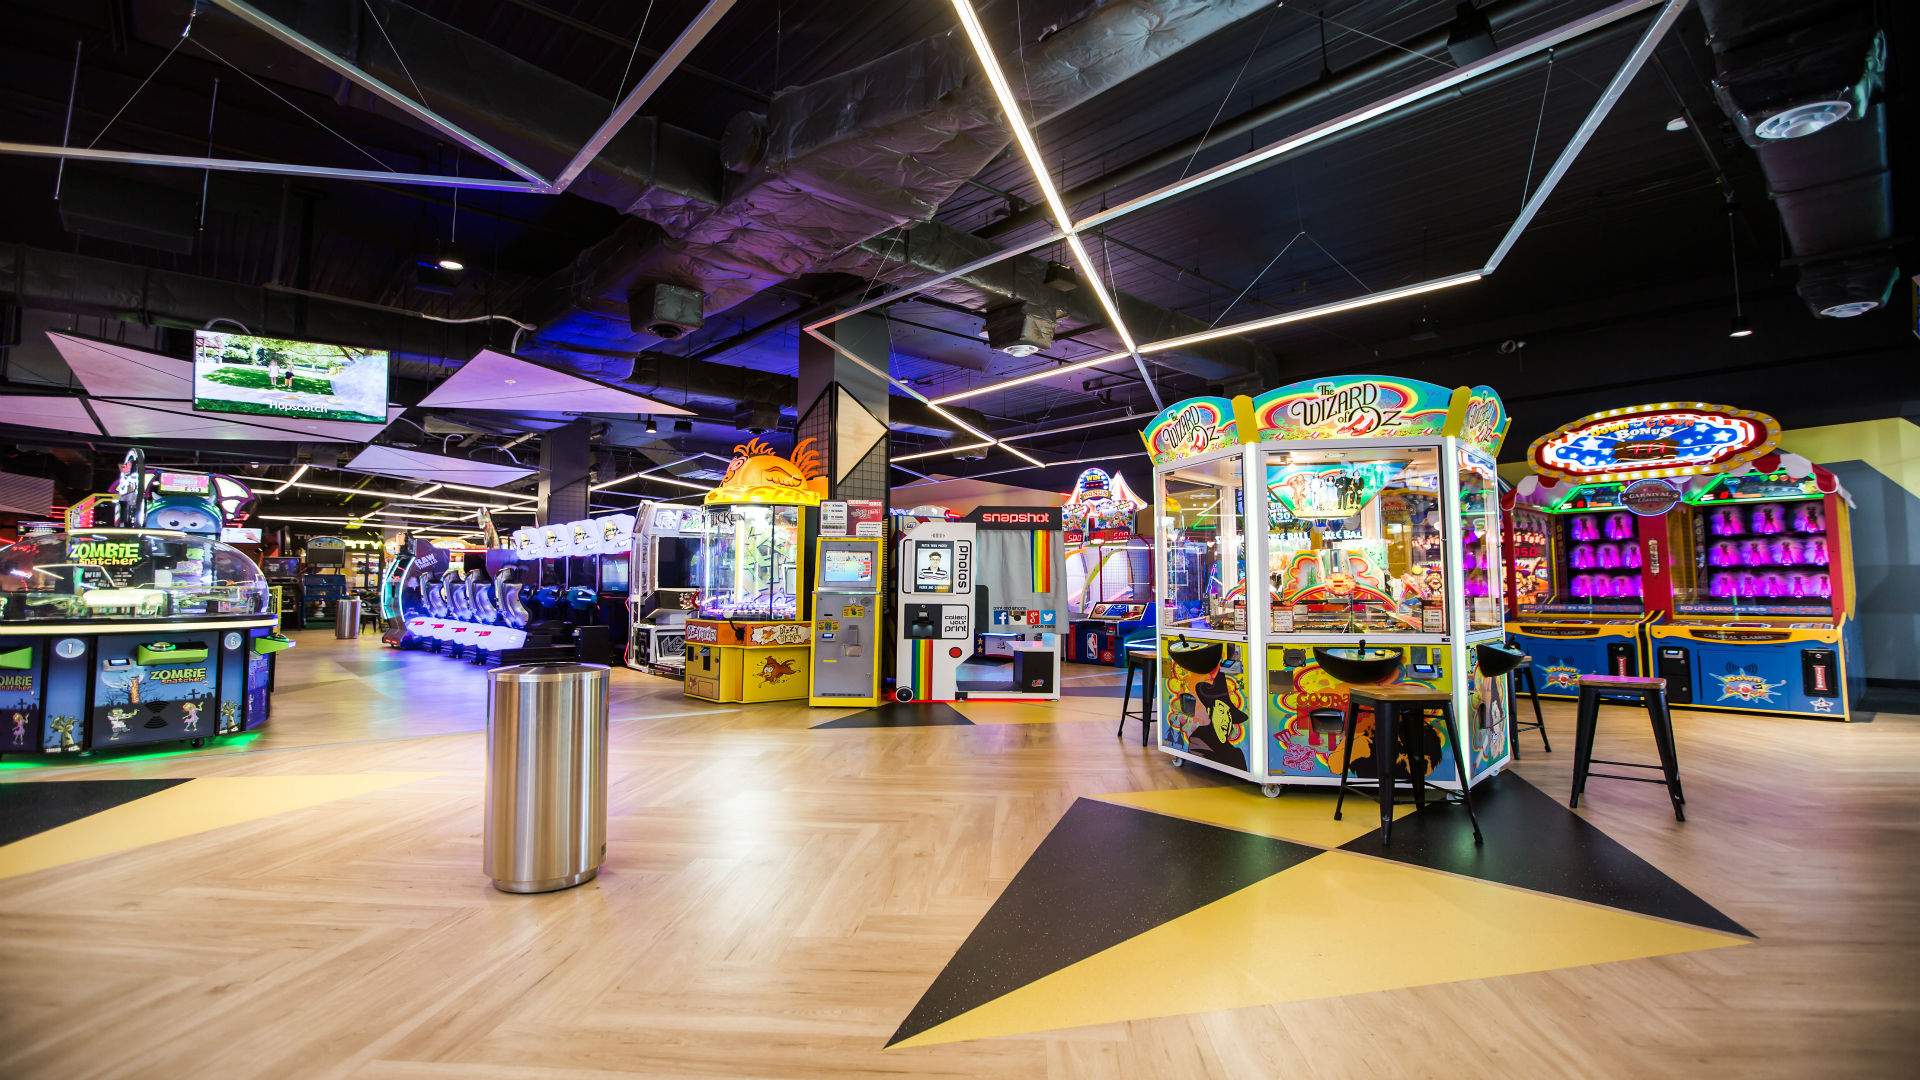 Timezone Australia's Tenth NSW Location Is Opening in Central Park